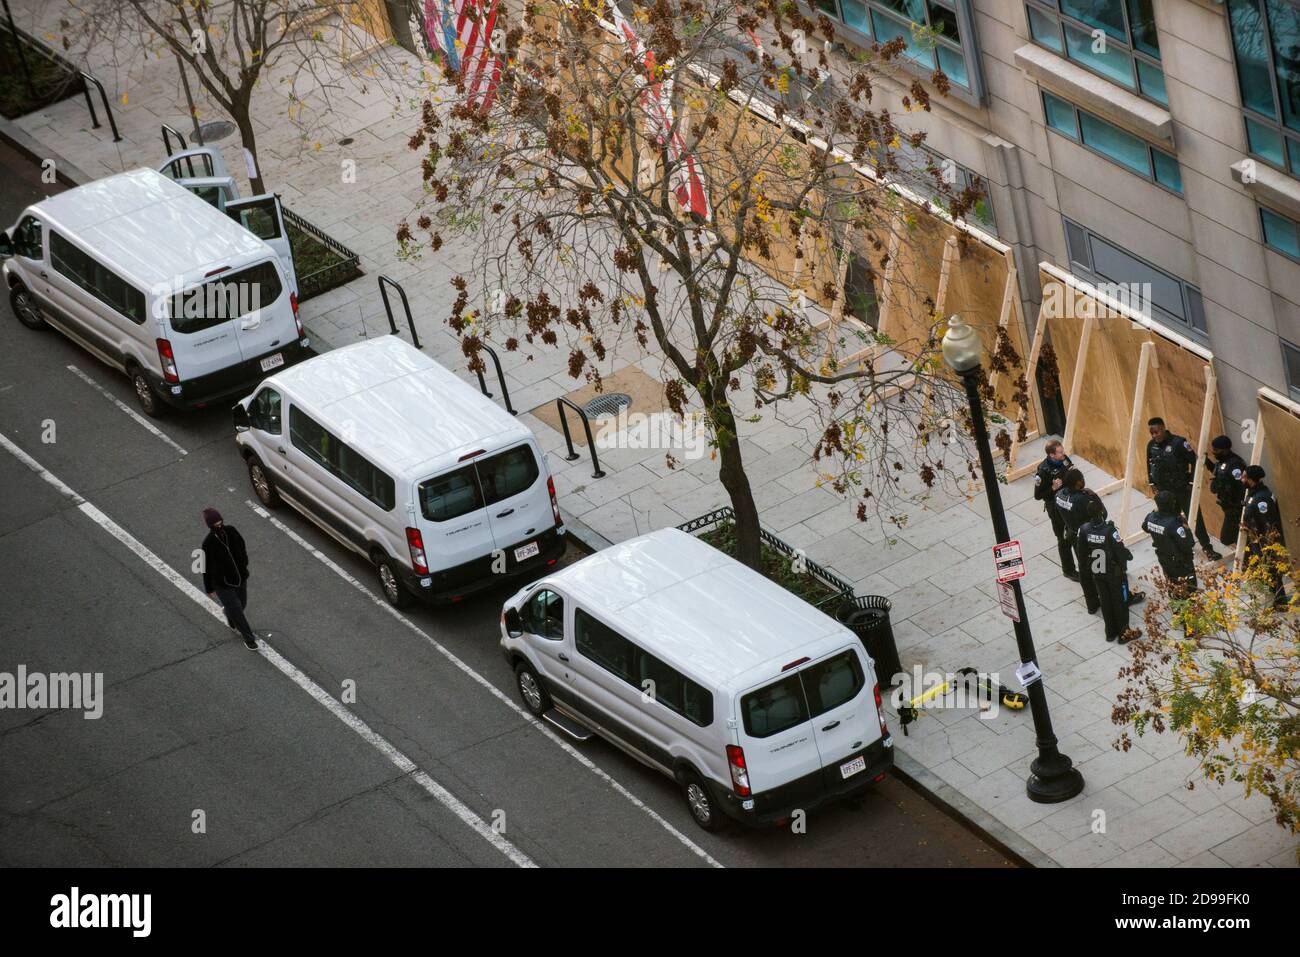 Washington DC, USA. 3rd Nov 2020. Metropolitan DC Police standing by in front of boarded up storefronts in front of their vans along E St NW on Election day 3rd November 2020, in anticipation of election related riots. Yuriy Zahvoyskyy / Alamy Live News. Stock Photo